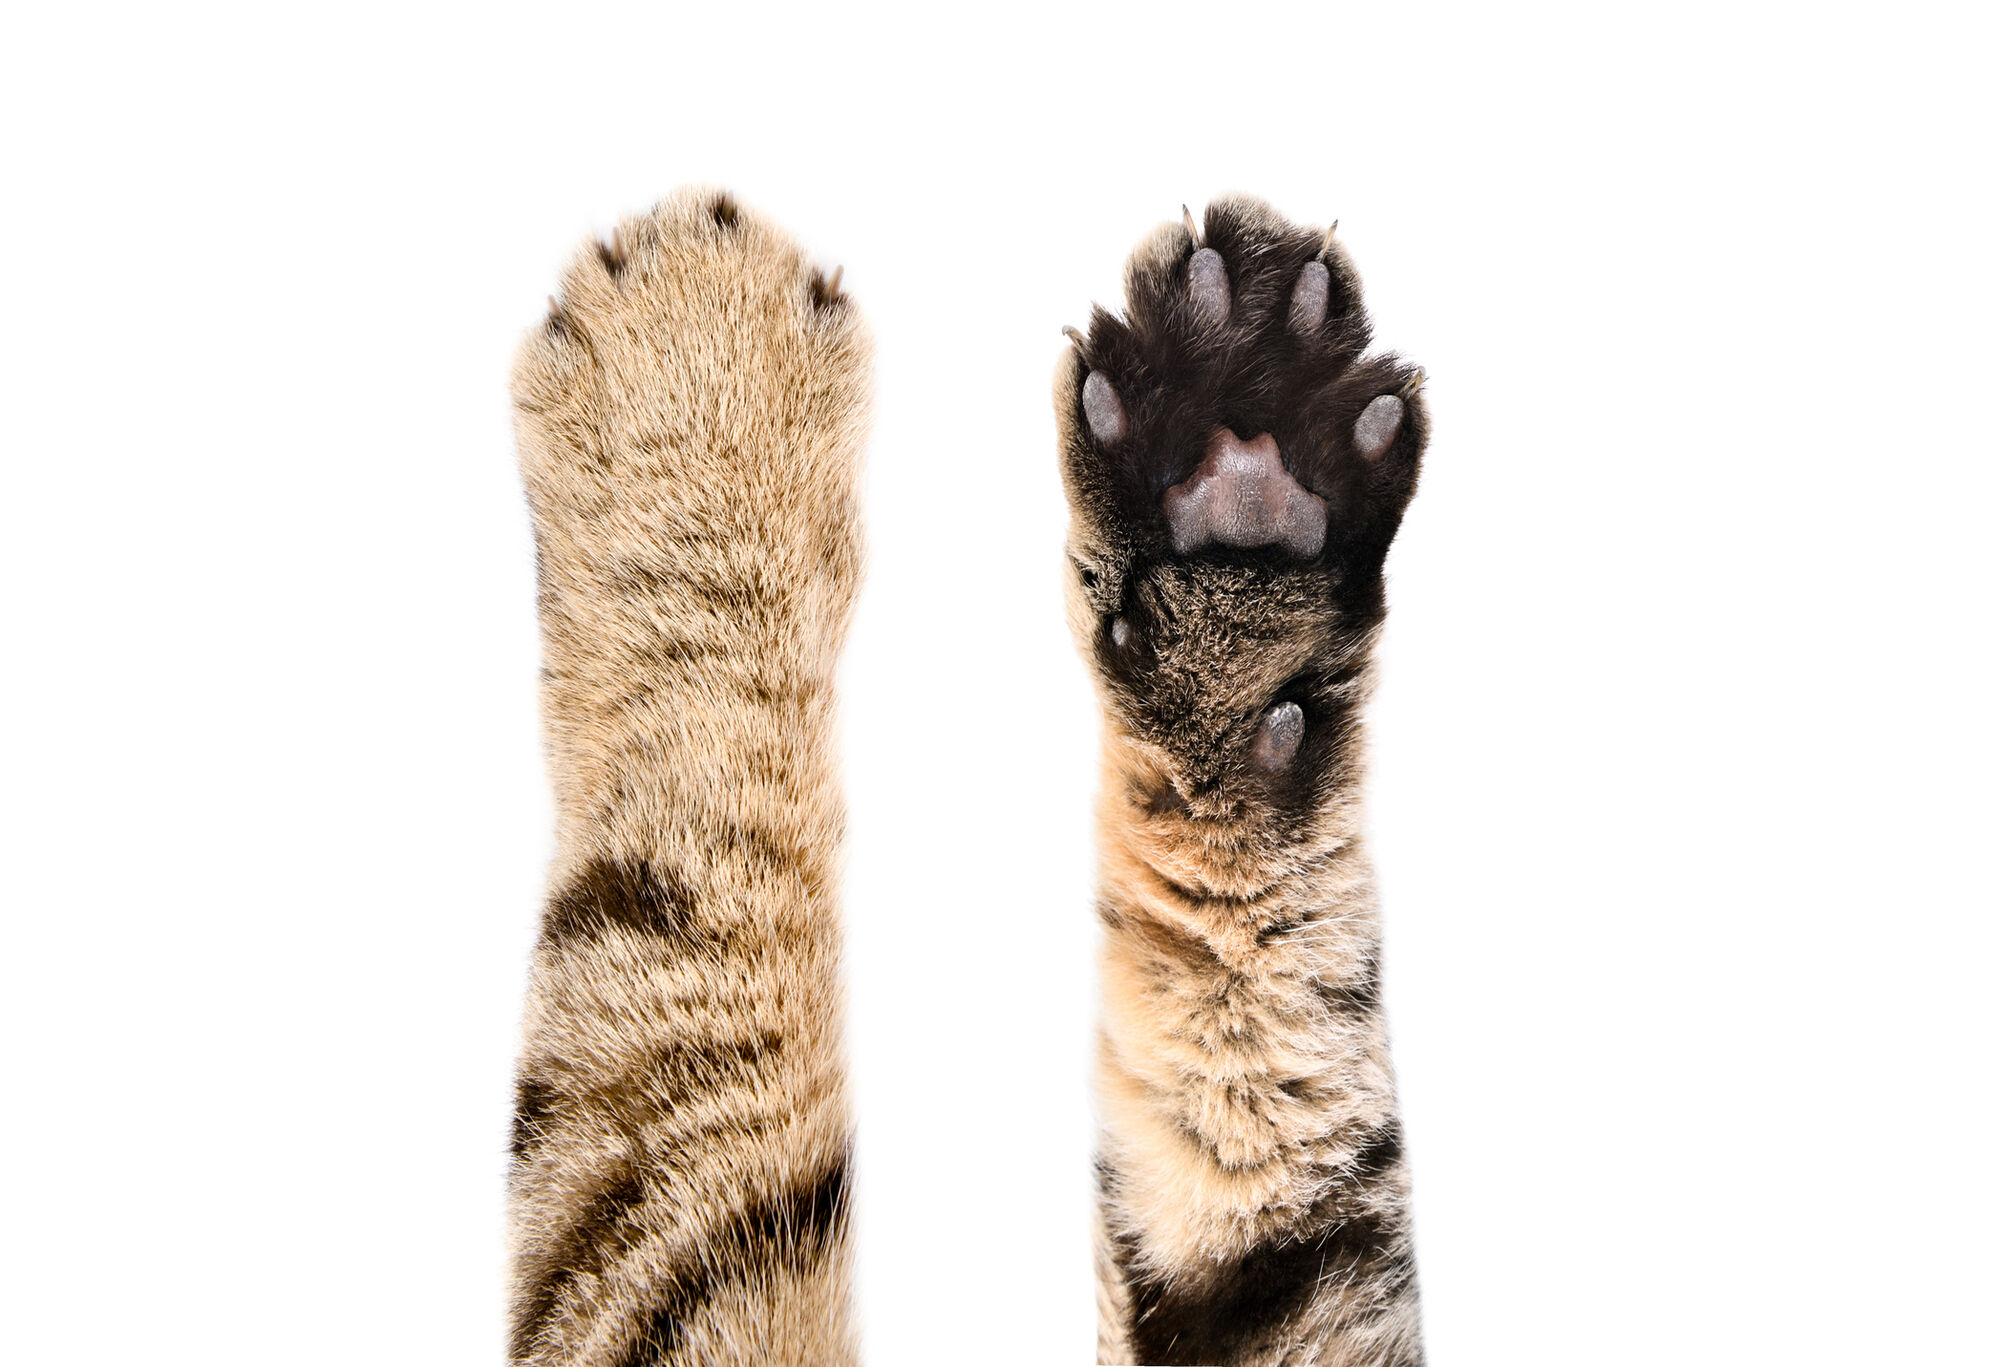 Paws of a brown tabby cat